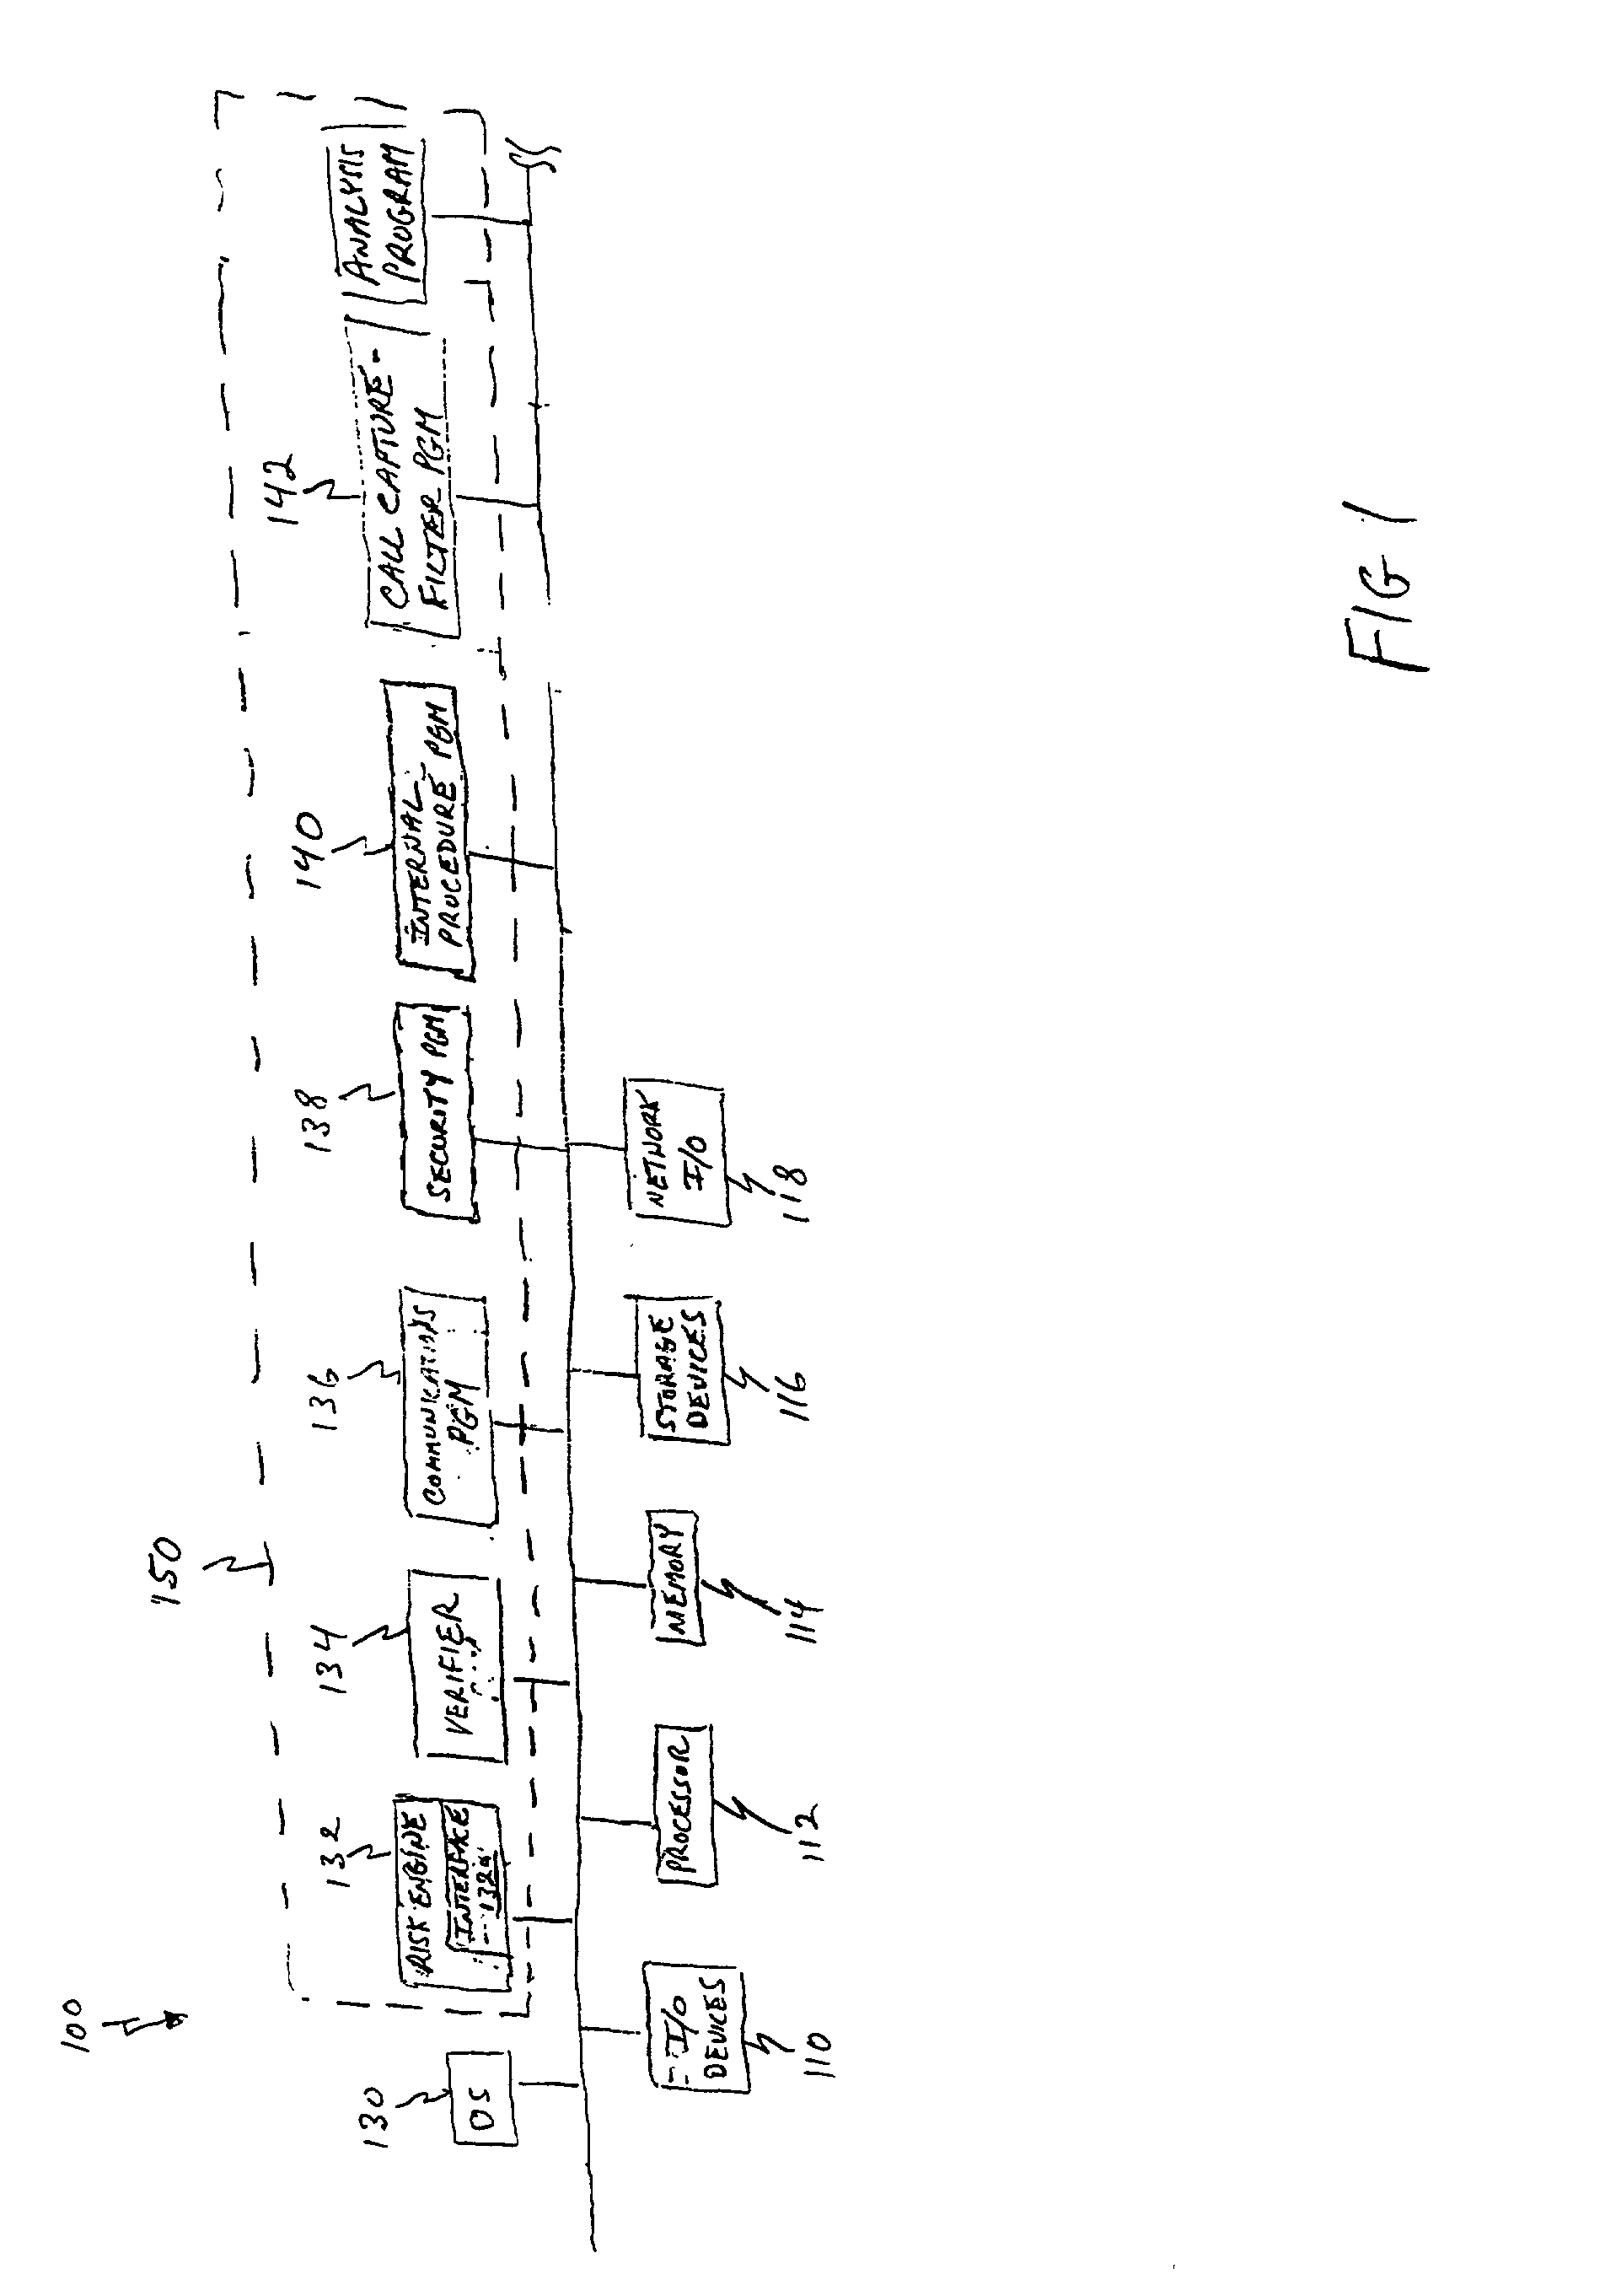 System and method for detecting high credit risk customers